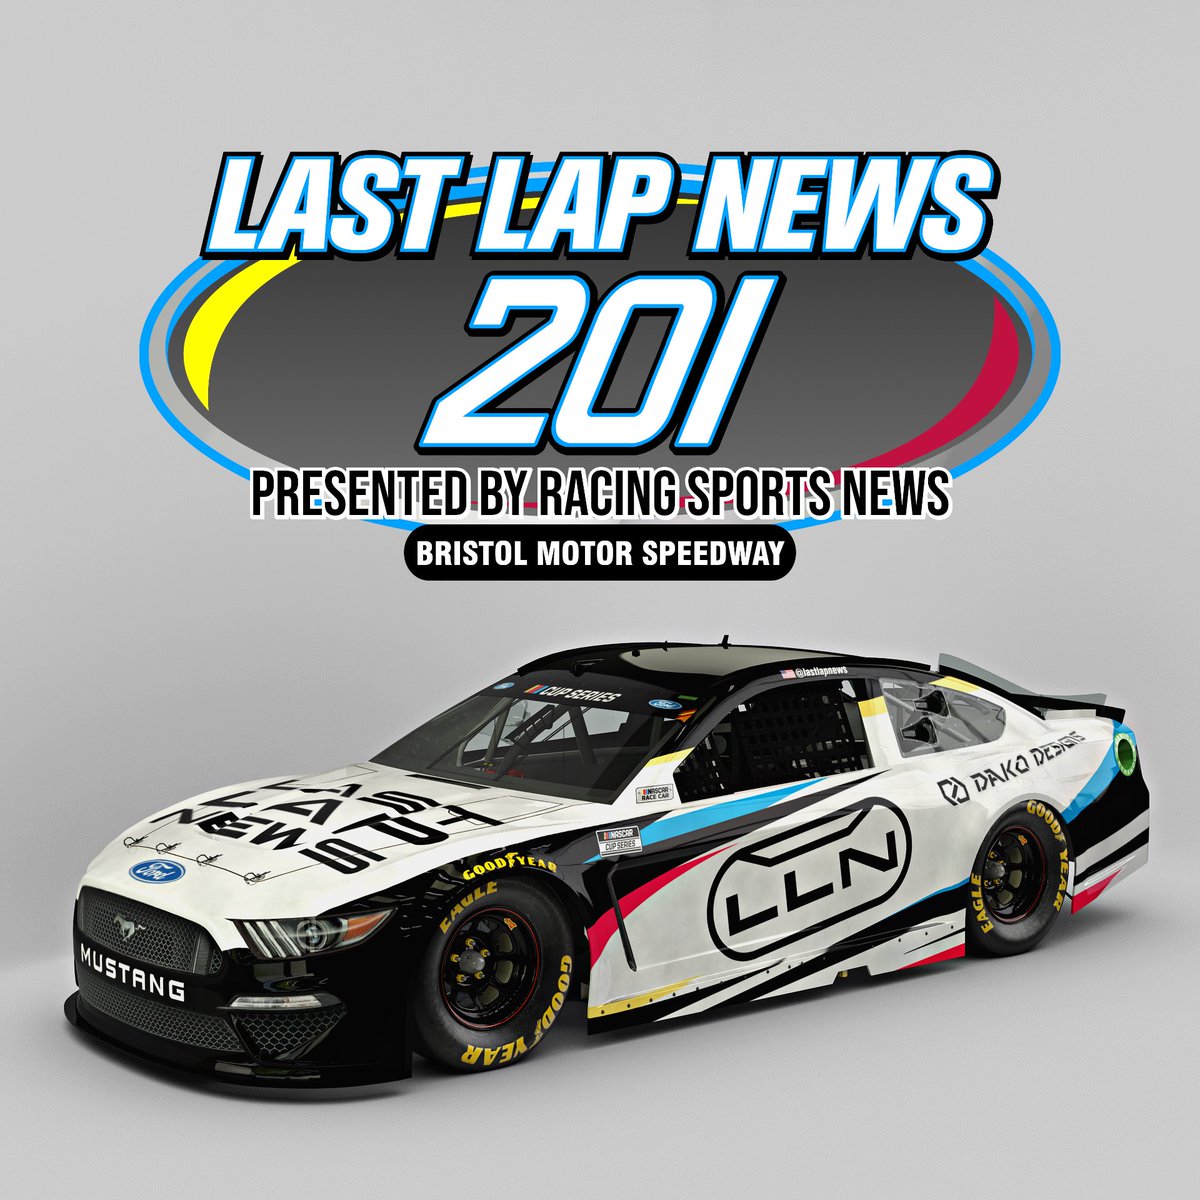 Tomorrow night on the @TheCORELeague YouTube check out the Last Lap News 201 Presented By Racing Sports News at the virtual Bristol Motor Speedway! Race broadcast channel link: https://t.co/lPdSJYGtLh https://t.co/l8wySYJoI0